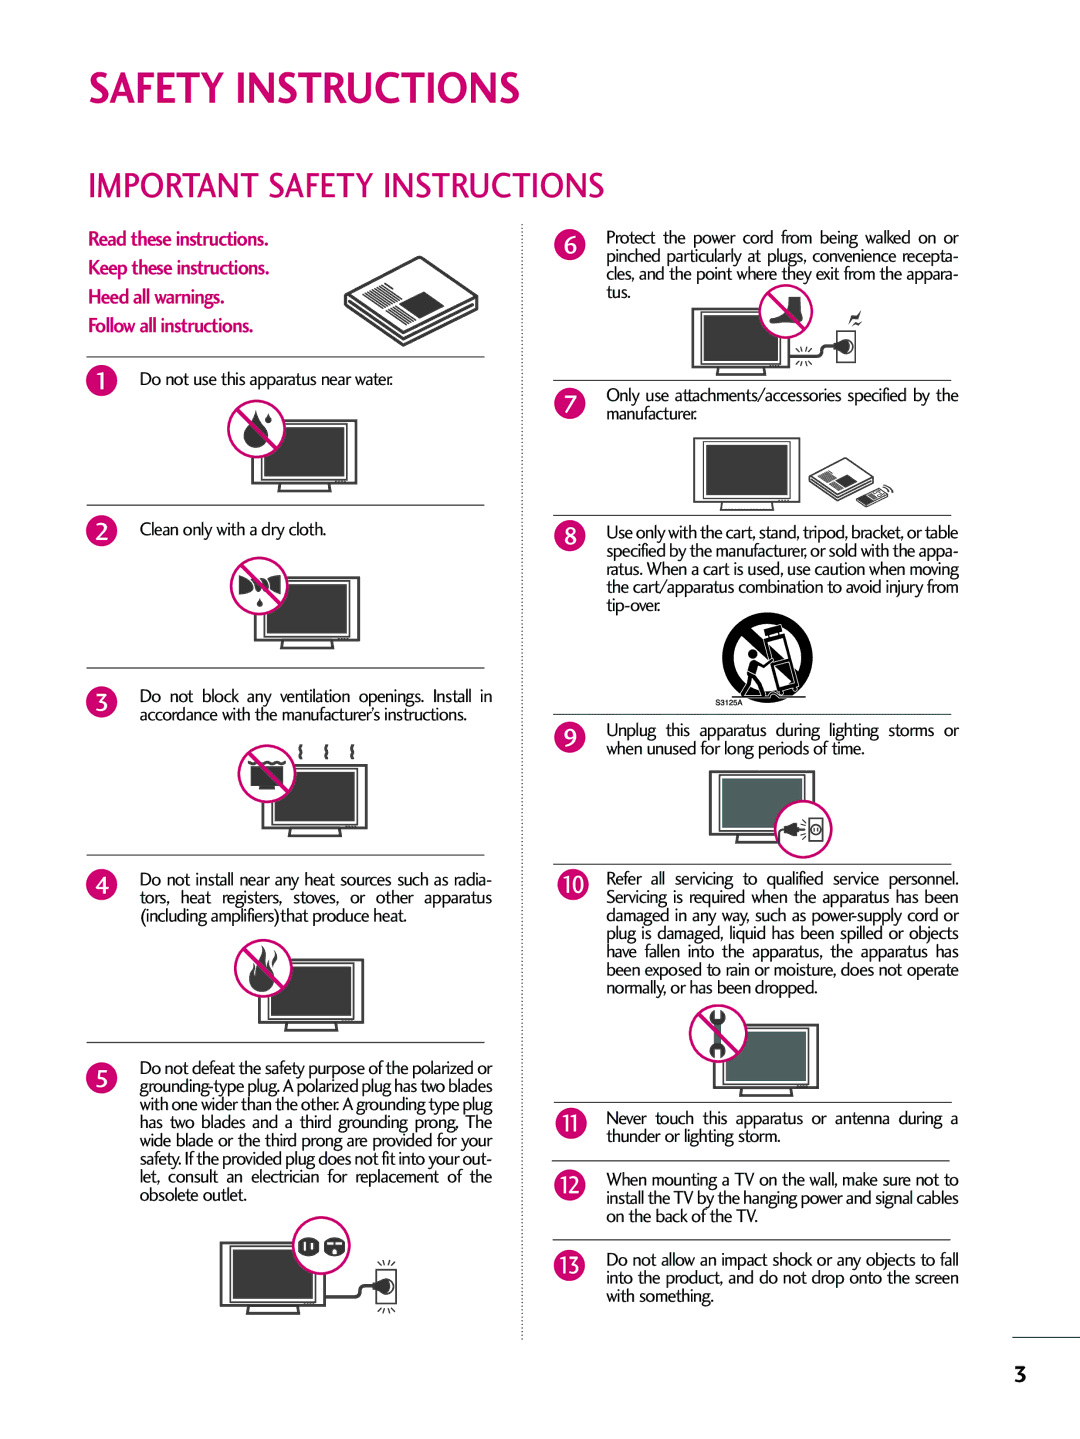 LG Electronics 42LD655H, 55LD650H Important Safety Instructions, Thunder or lighting storm, On the back of the TV 